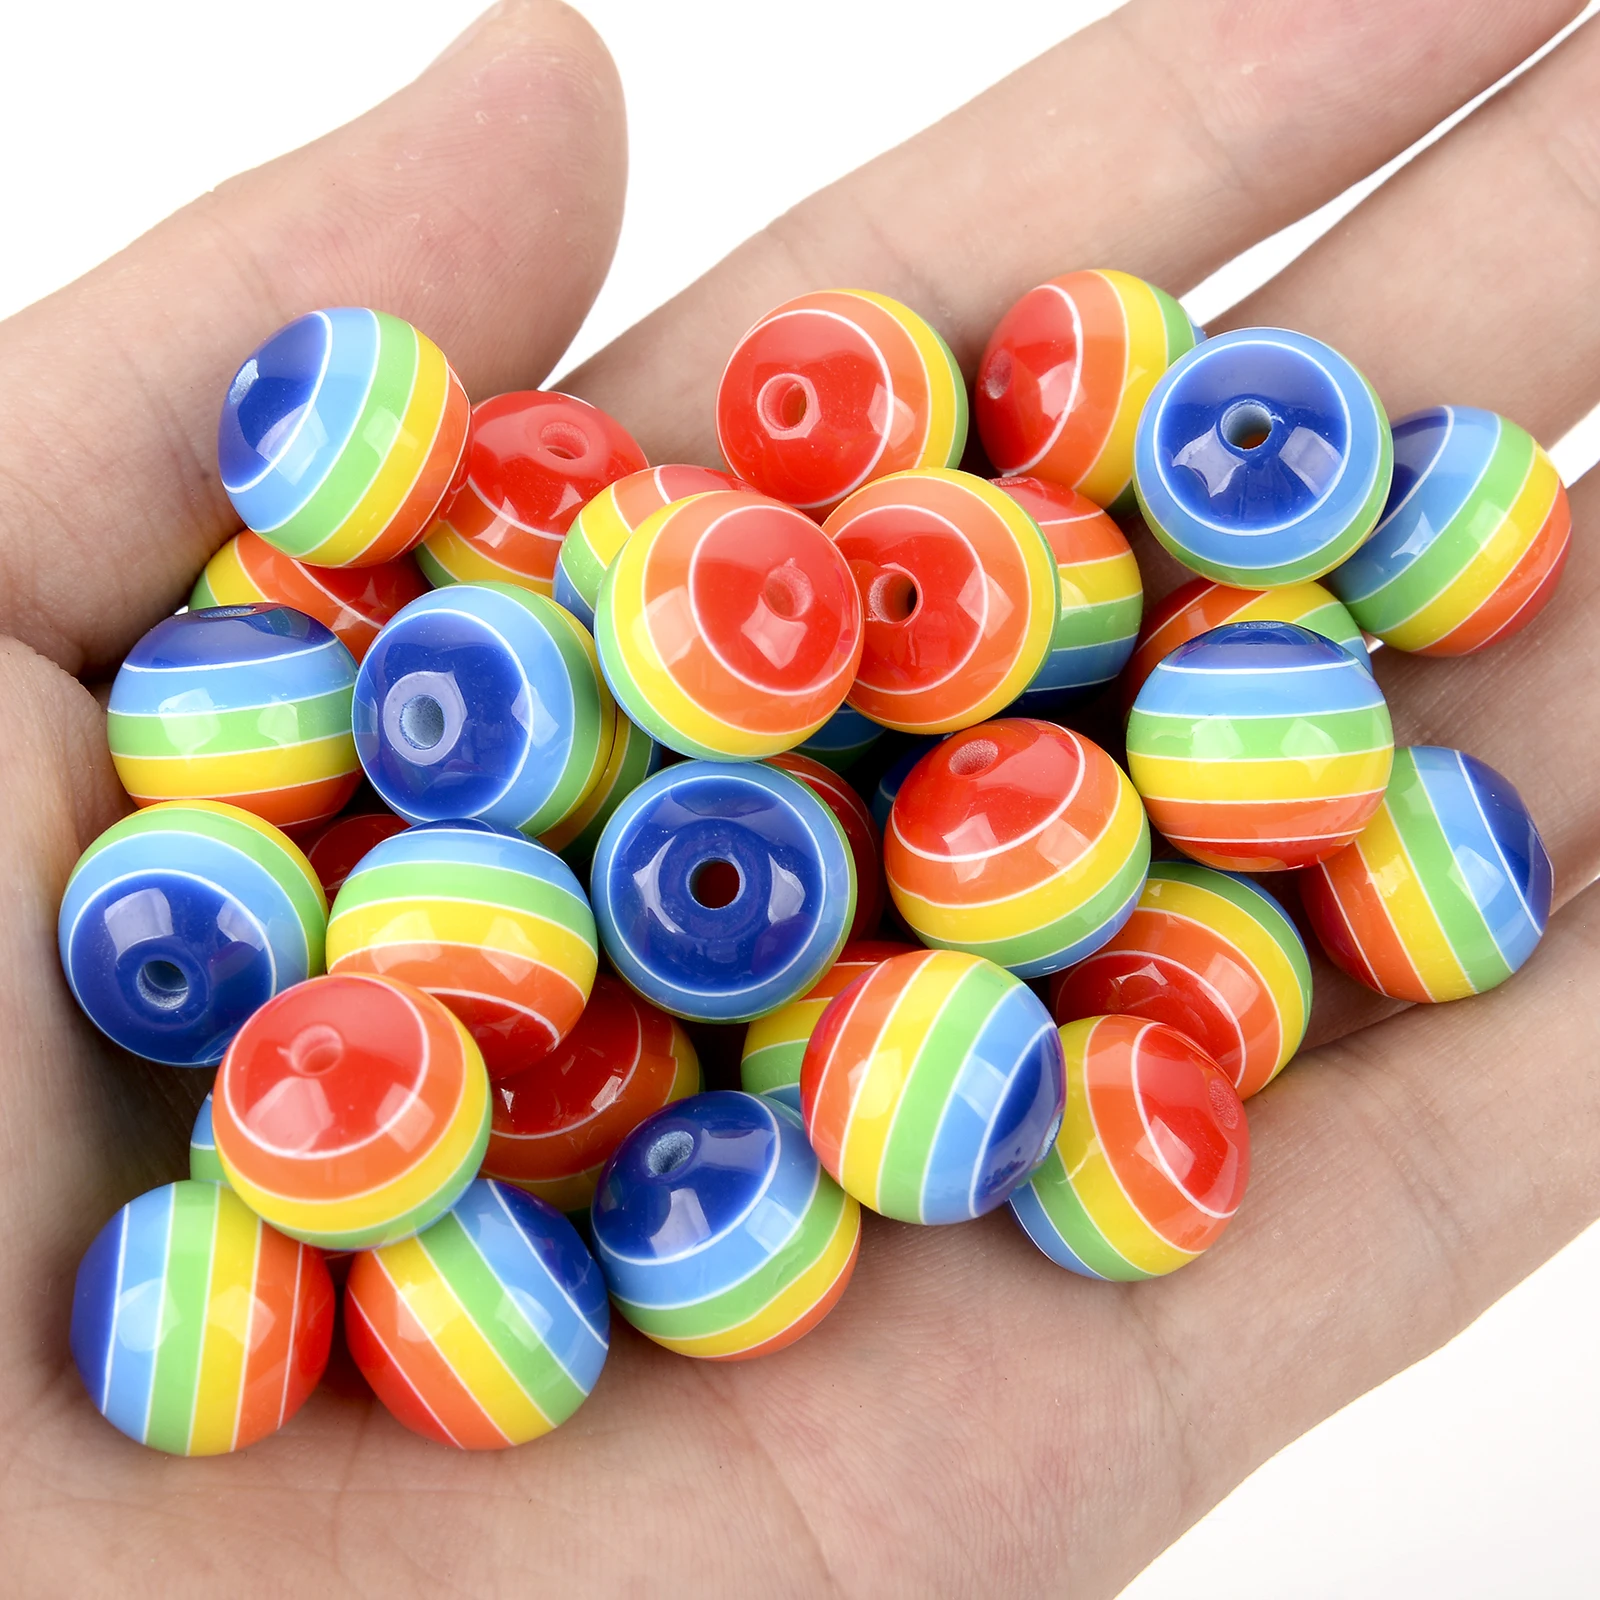 3D Printed colorful circle Beads, rainbow cutout acrylic 32mm Earring  Necklace pendant bead, one hole at top DIY blanks burnt orange